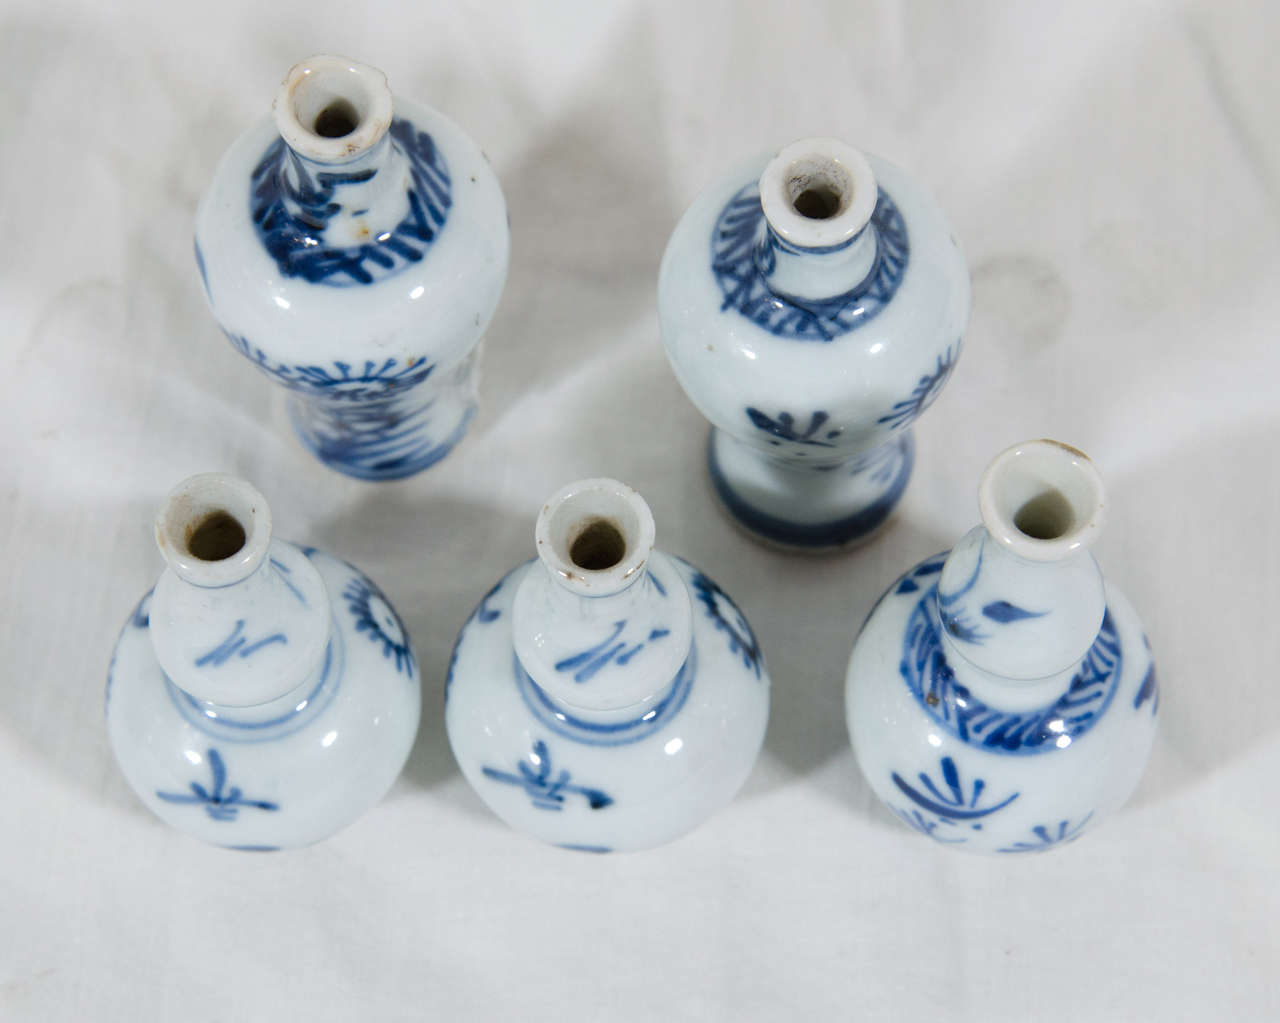 A Kangxi miniature Blue and White five piece garniture comprising a pair of baluster vases and three double gourd vases. It is decorated with simple flower sprigs painted in tones of cobalt blue.